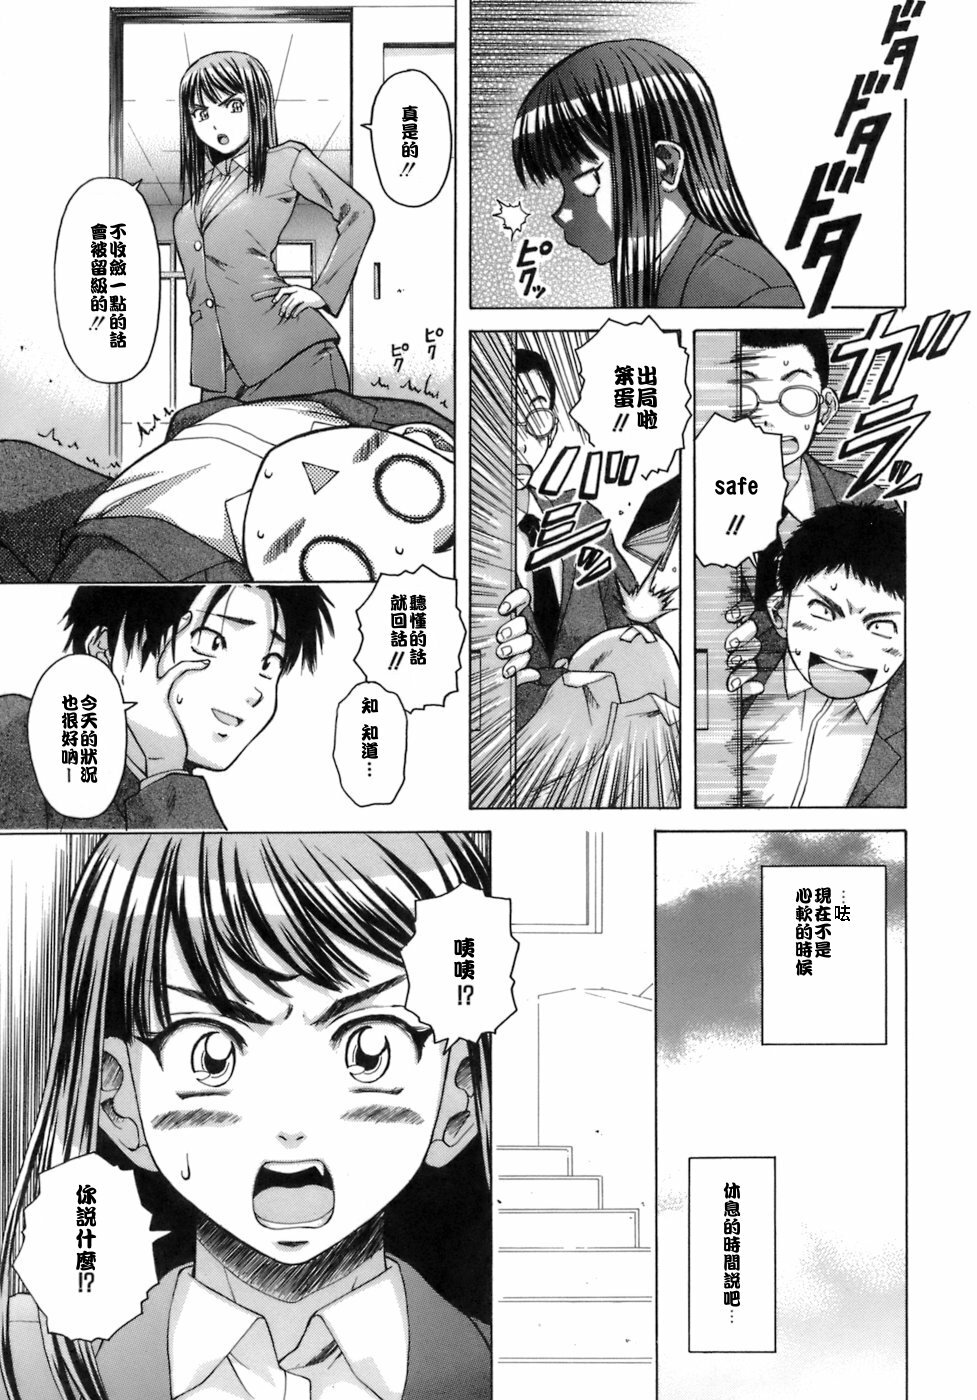 [Fuuga] Kyoushi to Seito to - Teacher and Student [Chinese] [悠月工房] page 50 full